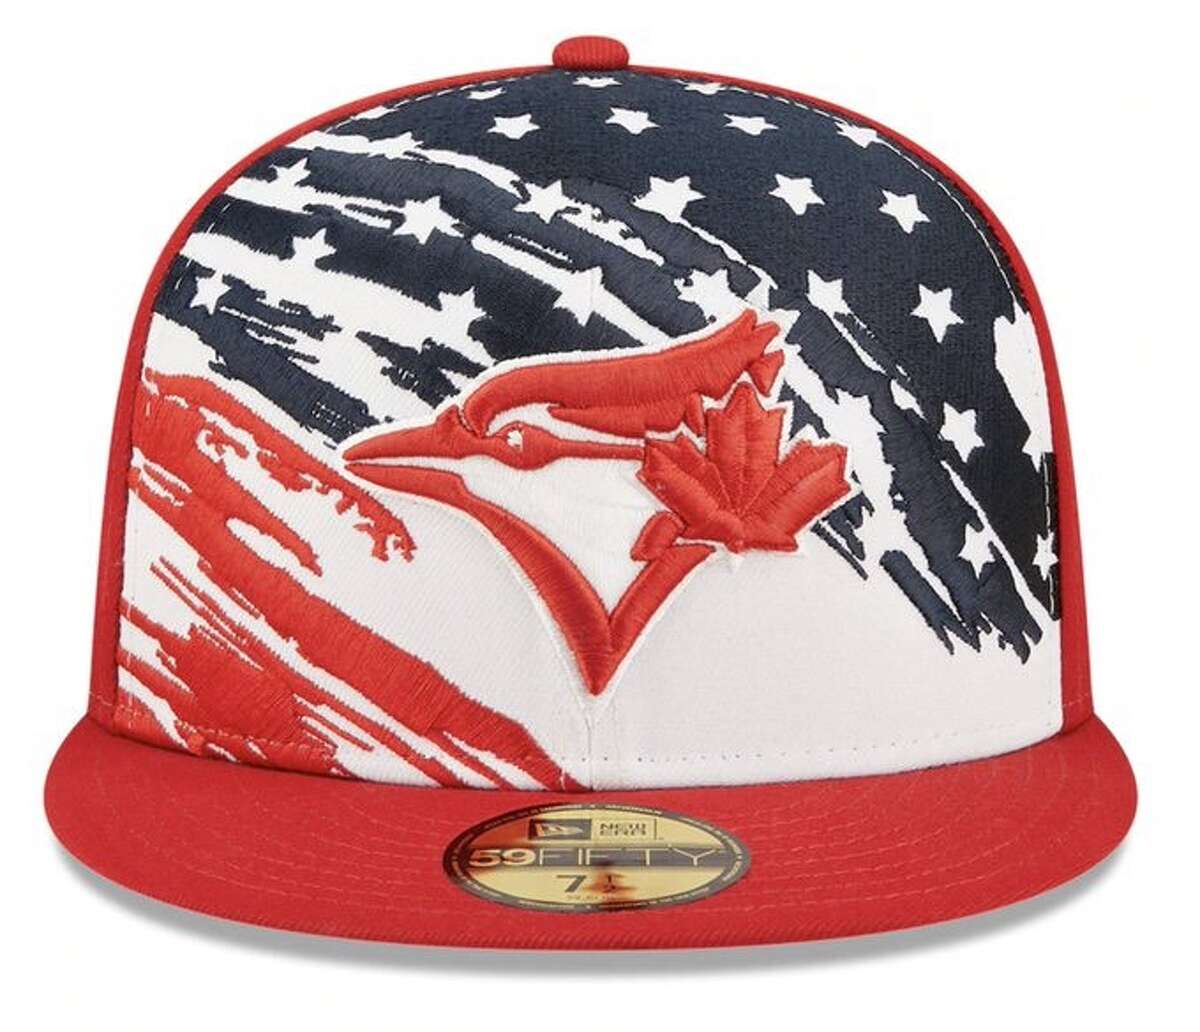 A Toronto Blue Jays cap featuring the American flag is being called a "snafu" by maker New Era.